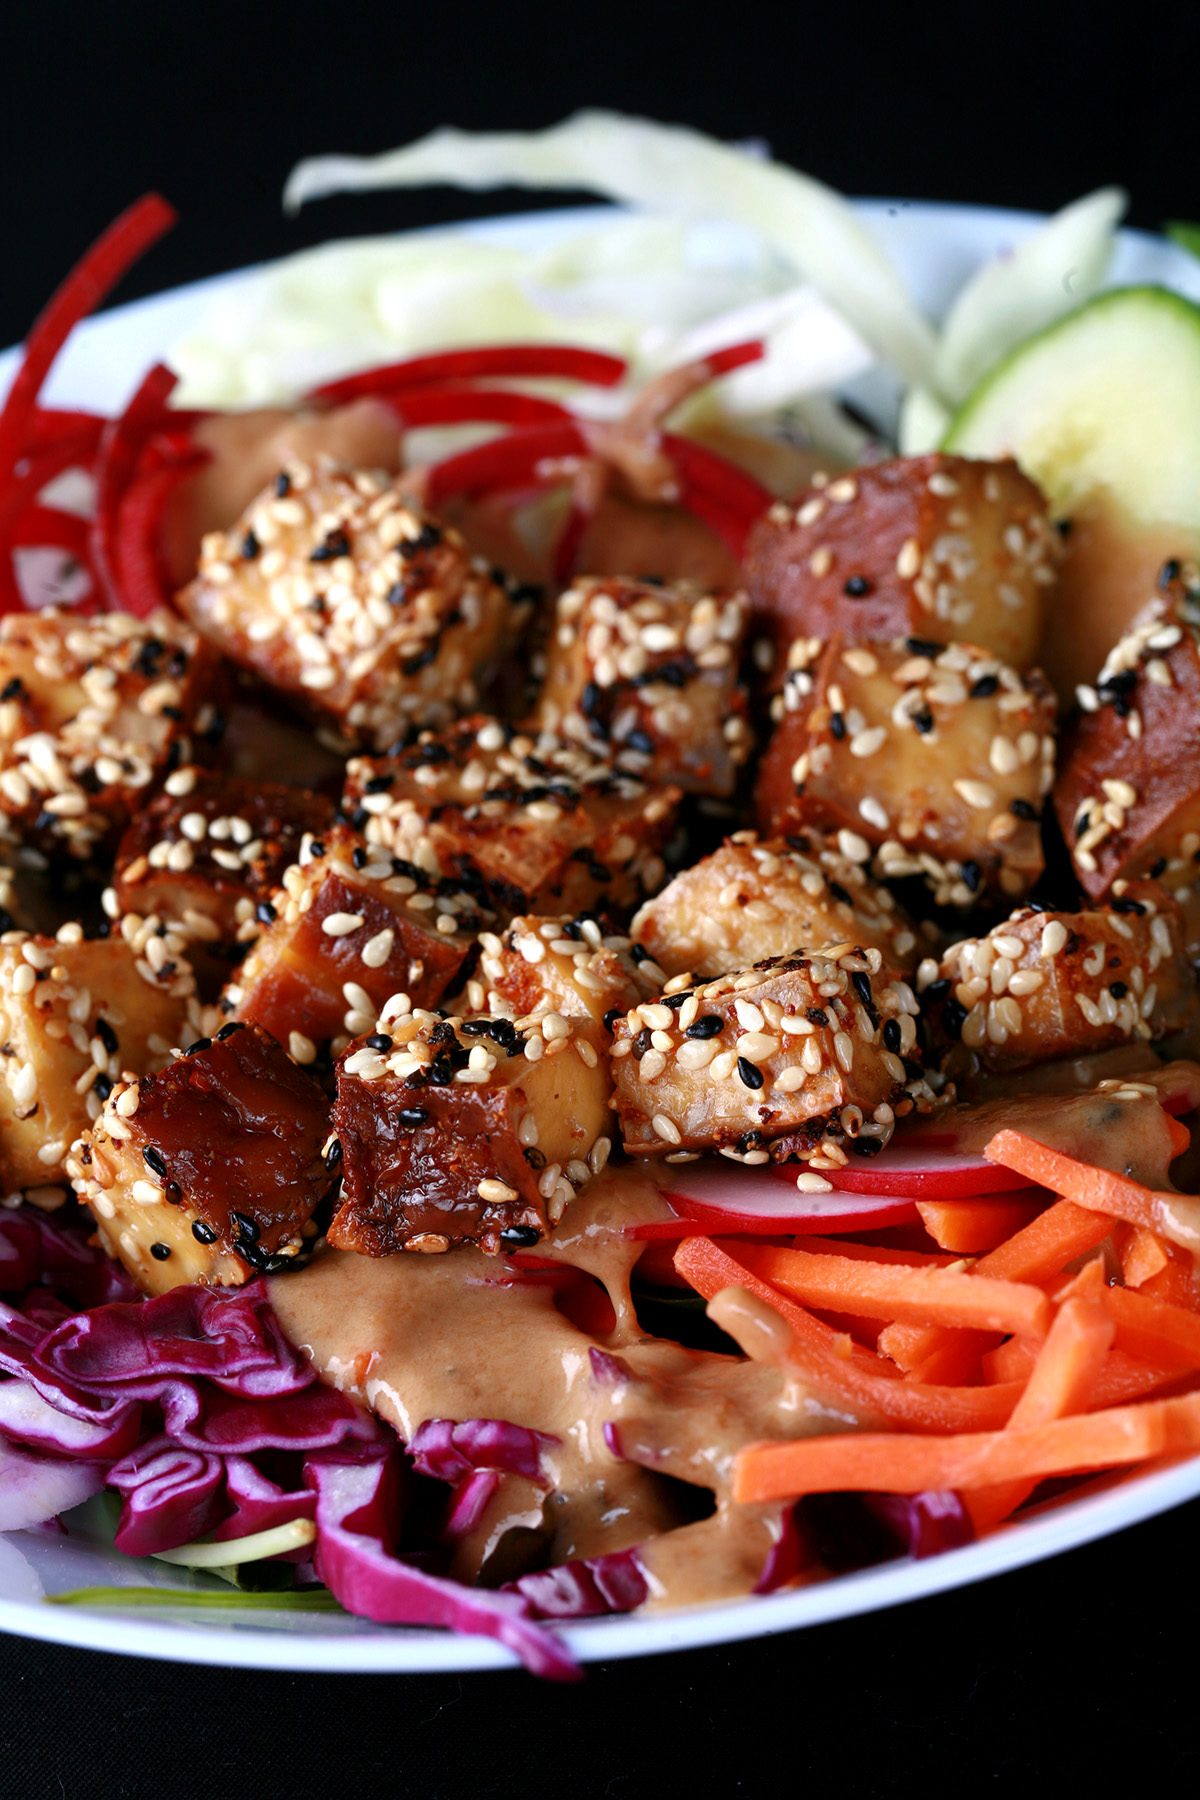 Cubes of sesame crusted smoked tofu on top of a colourful salad. Cucumbers, beets, carrots, and purple cabbage are visible.